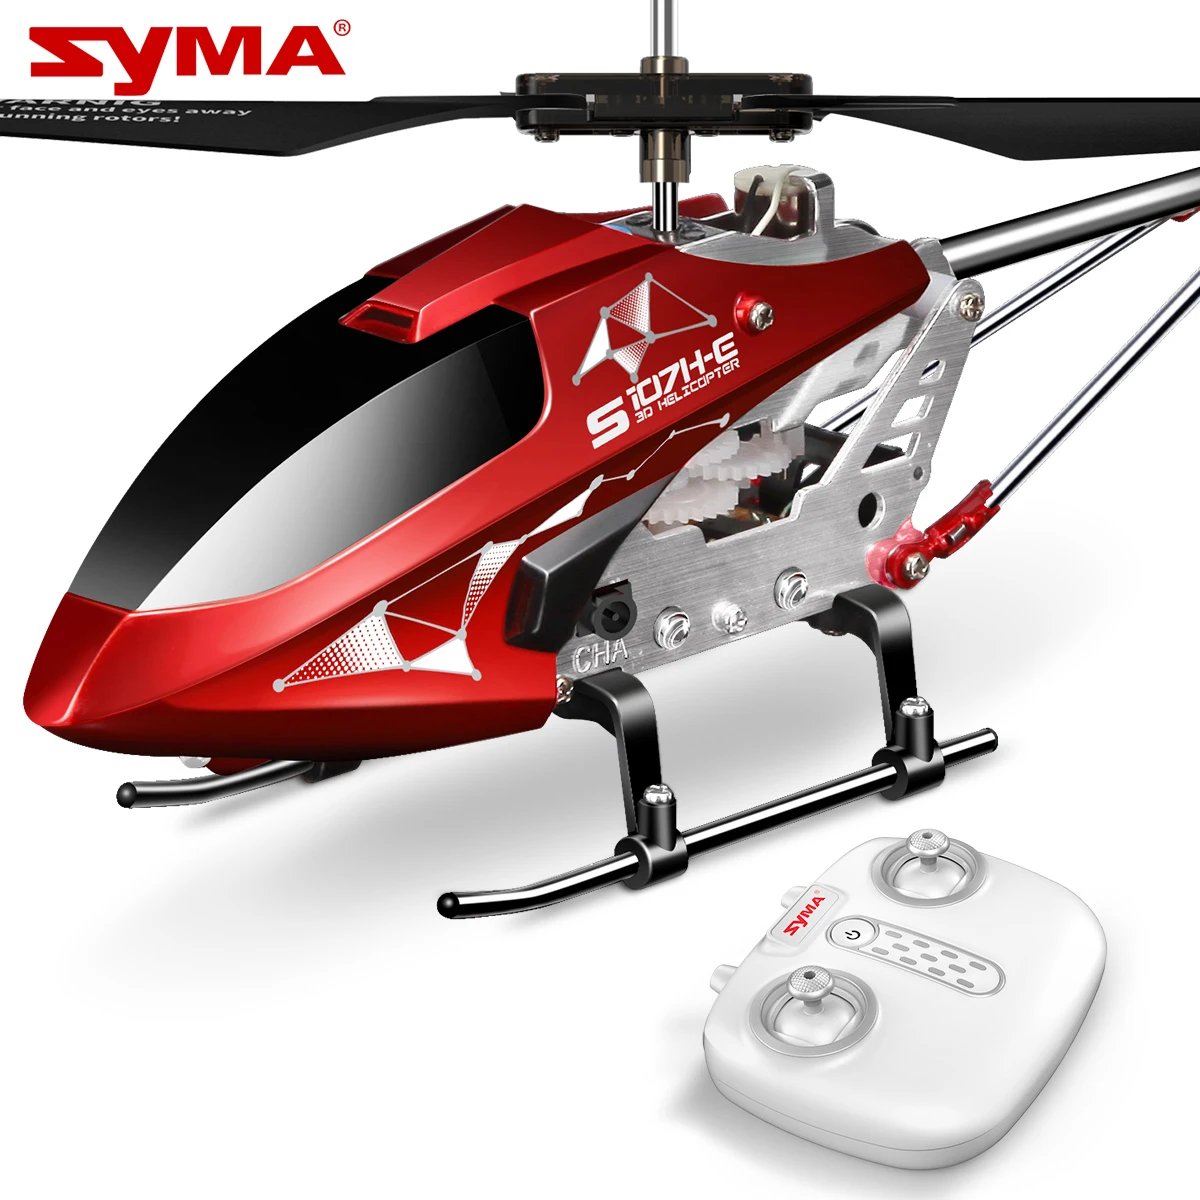 

SYMA Metal shell RC Helicopter Upgrade S107H Aircraft with Altitude Hold, One Key take Off/Landing 3.5CH Gyro Stabilizer for Kid